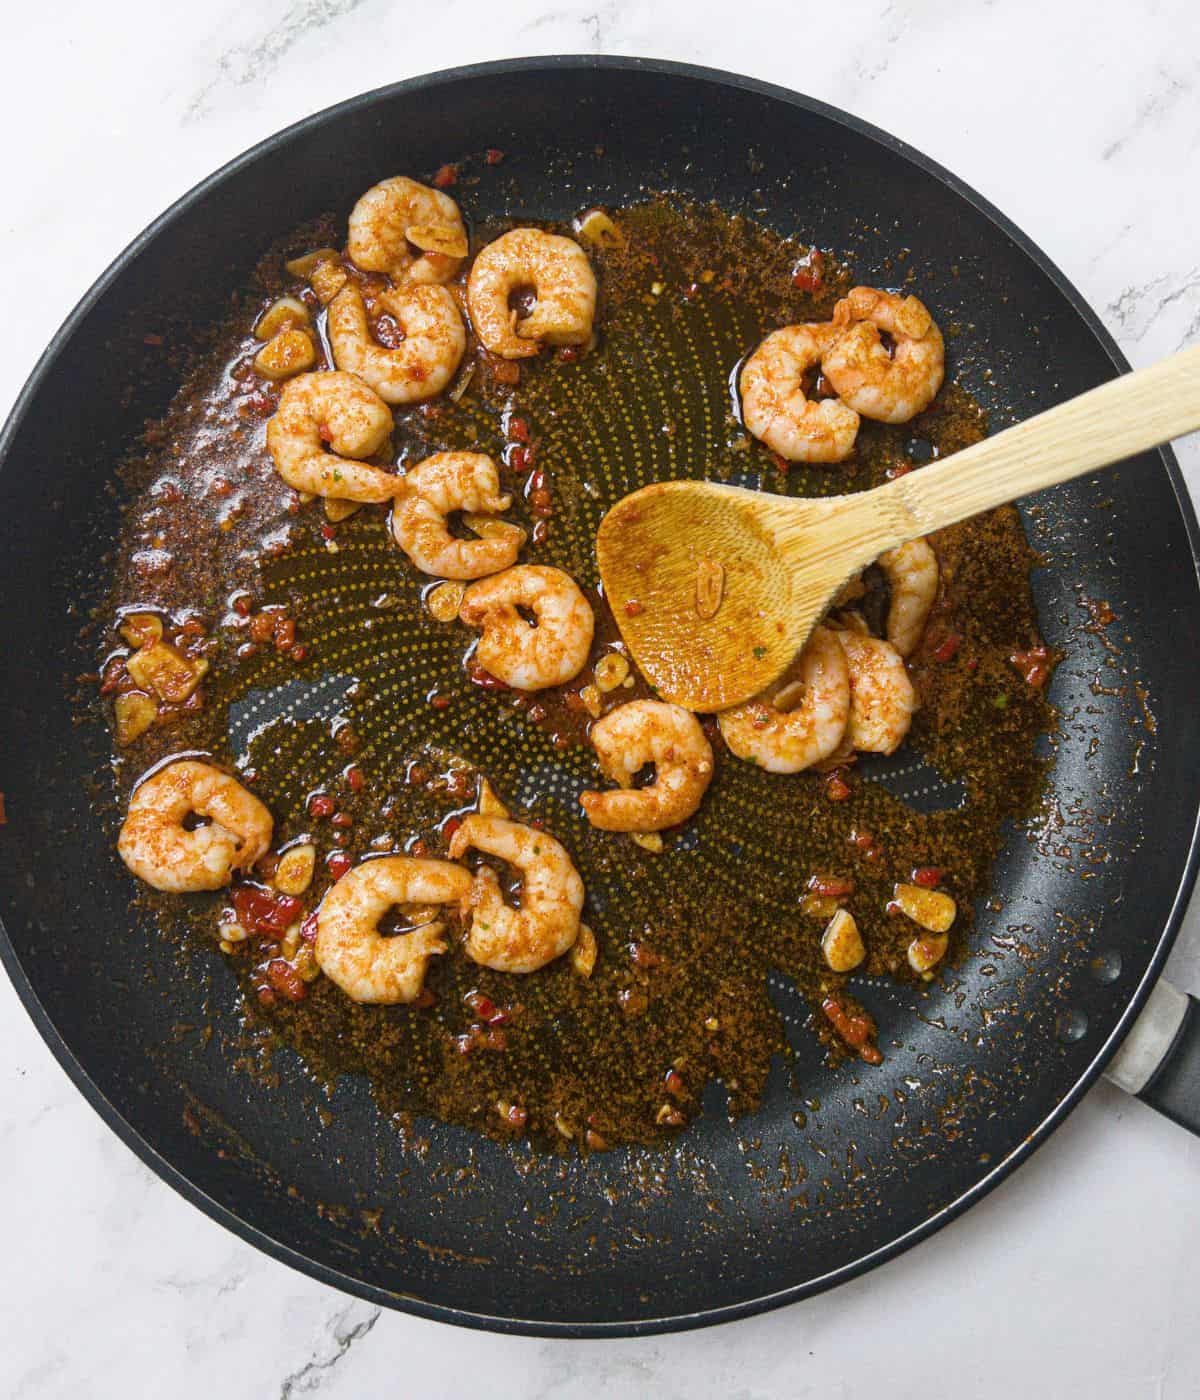 prawns with chilli and garlic being stirred in a frying pan.